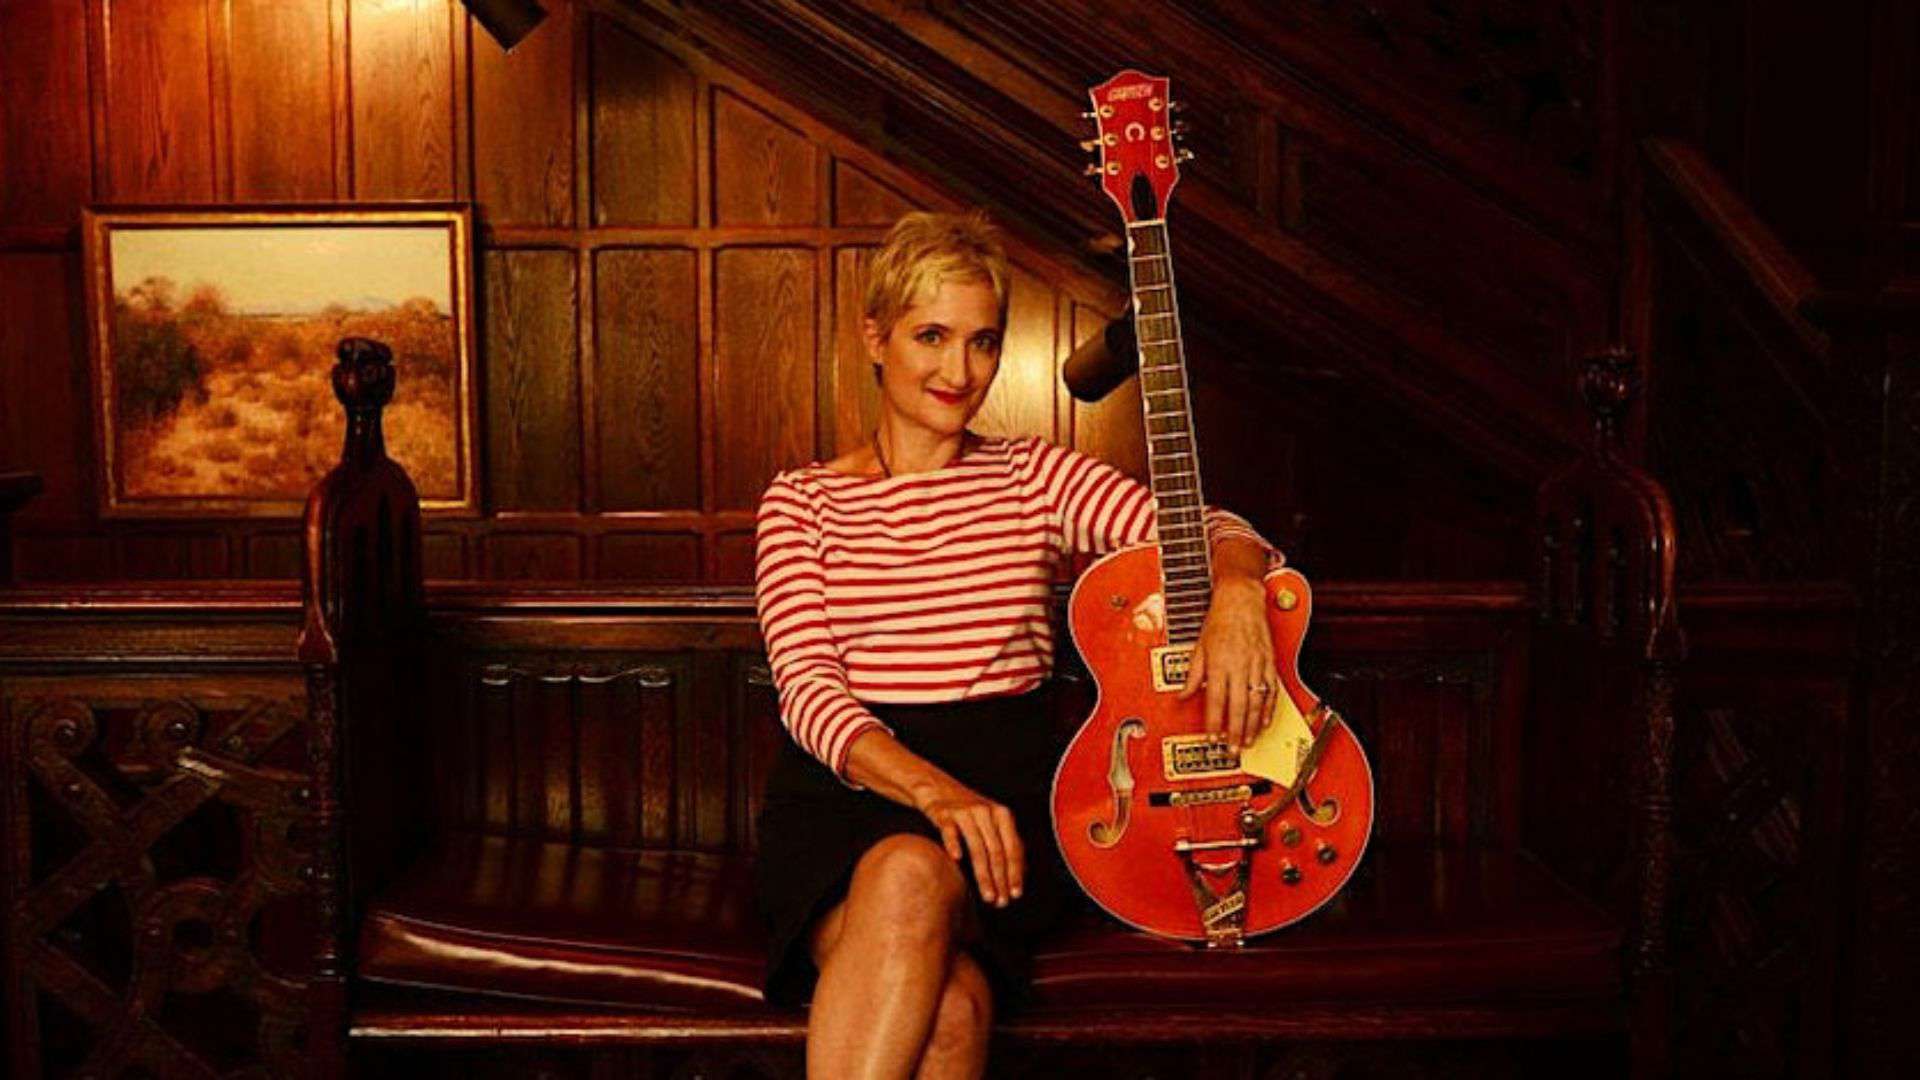 A headshot of artist Jill Sobule performing at Swallow Hill Music, a white woman with short blonde hair sitting on a couch, holding a large hollowbody guitar in her right hand and wearing a striped shirt.